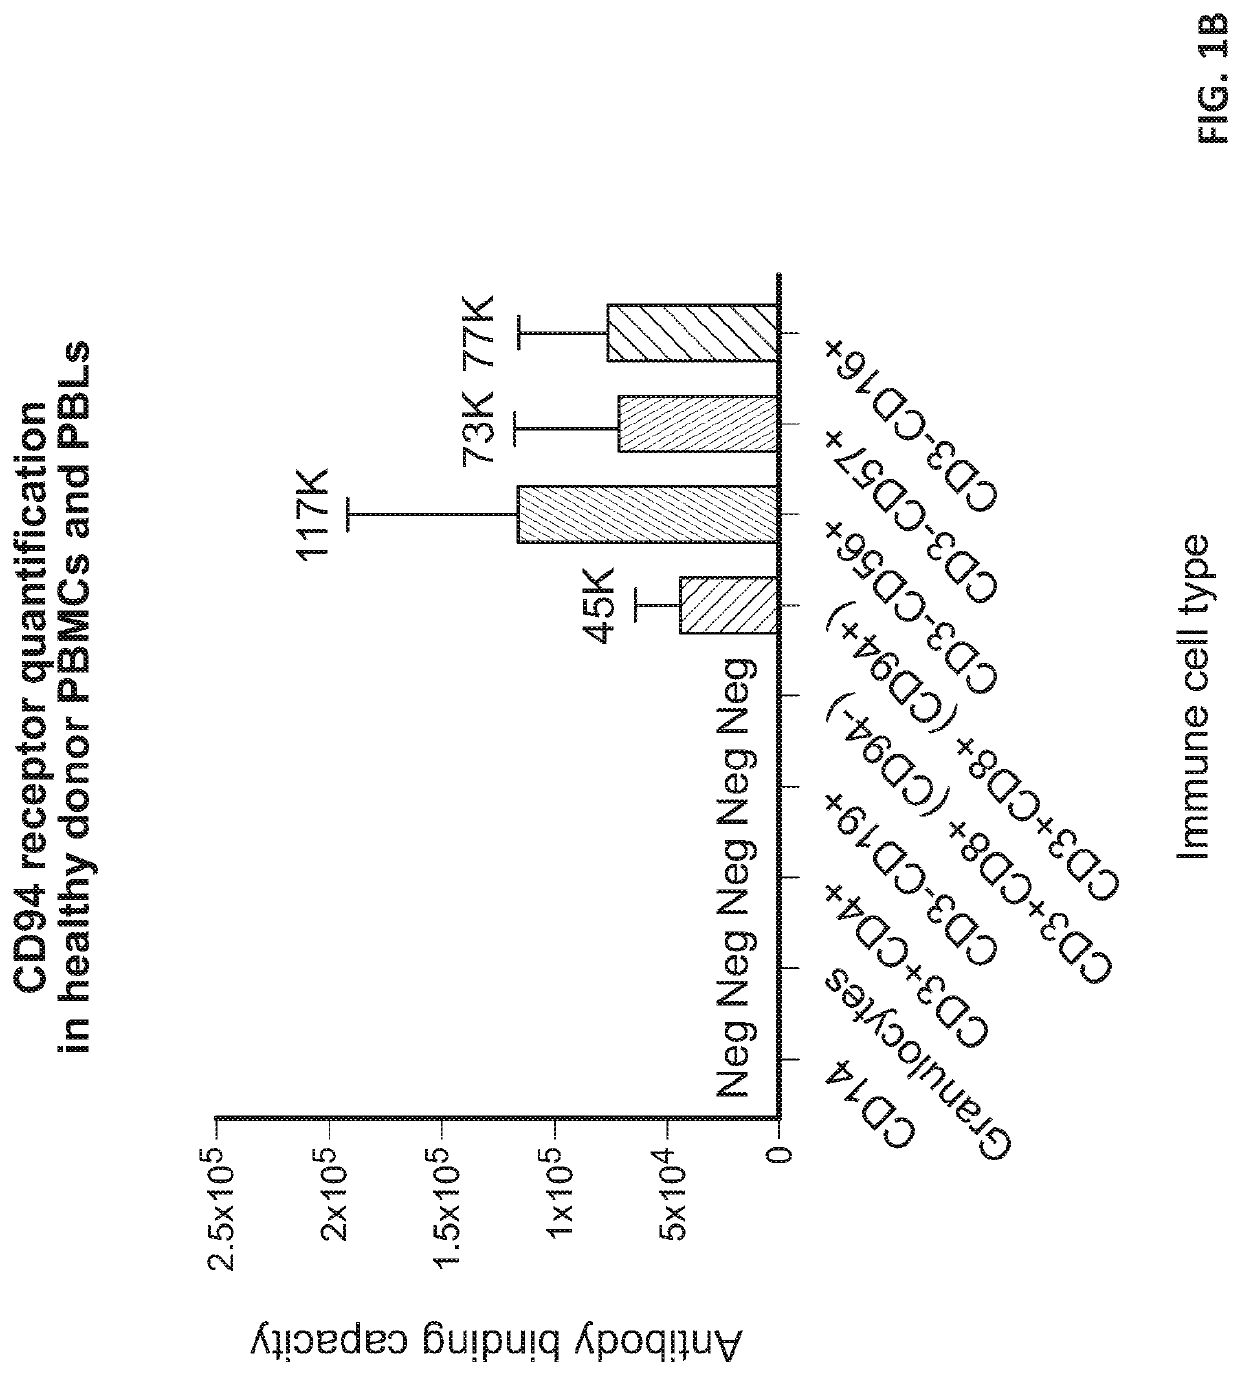 Methods of reducing large granular lymphocyte and natural killer cell levels